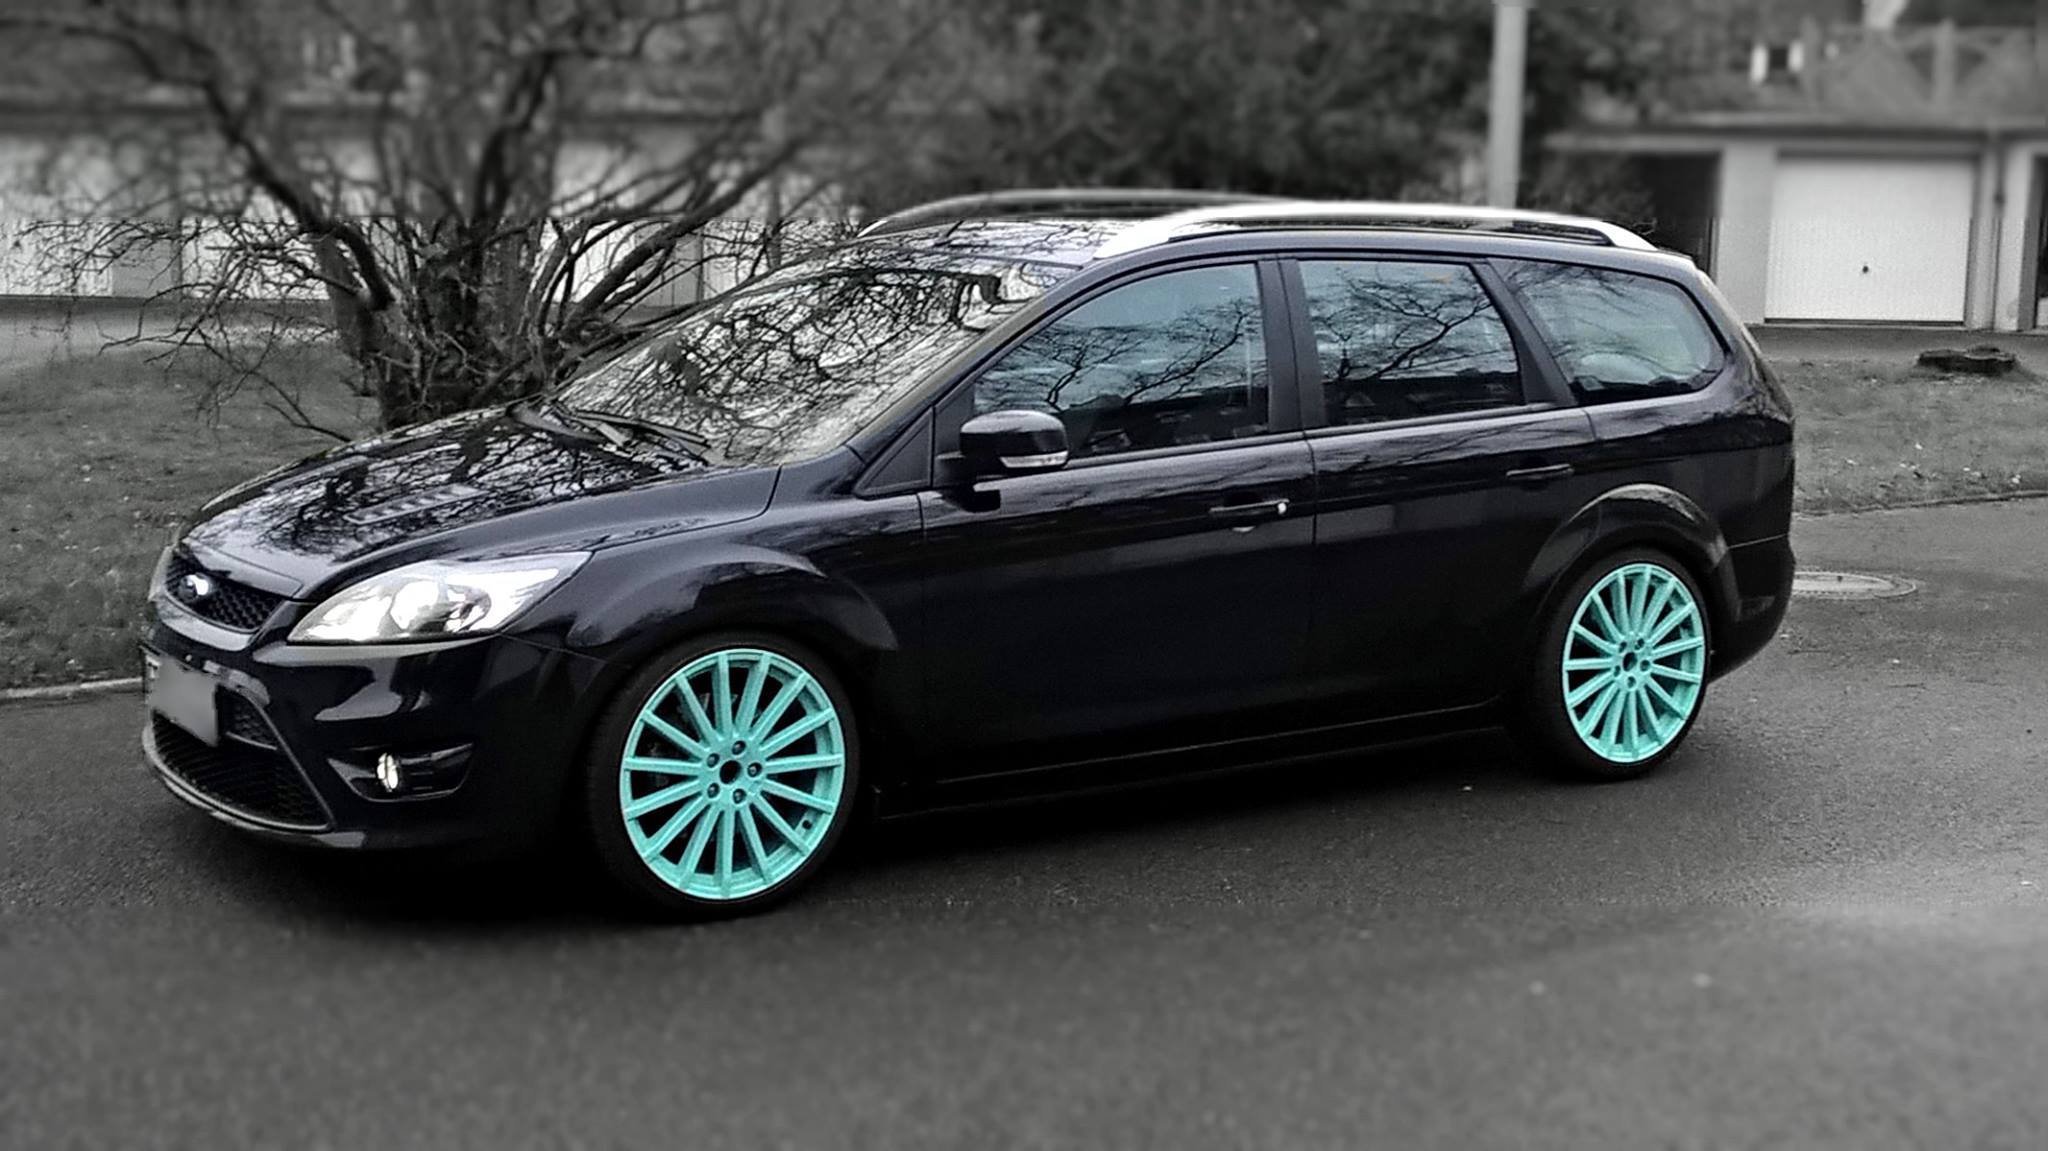 Ford Focus Mk2 wagon with a 2.5 L Duratec RS inline-five